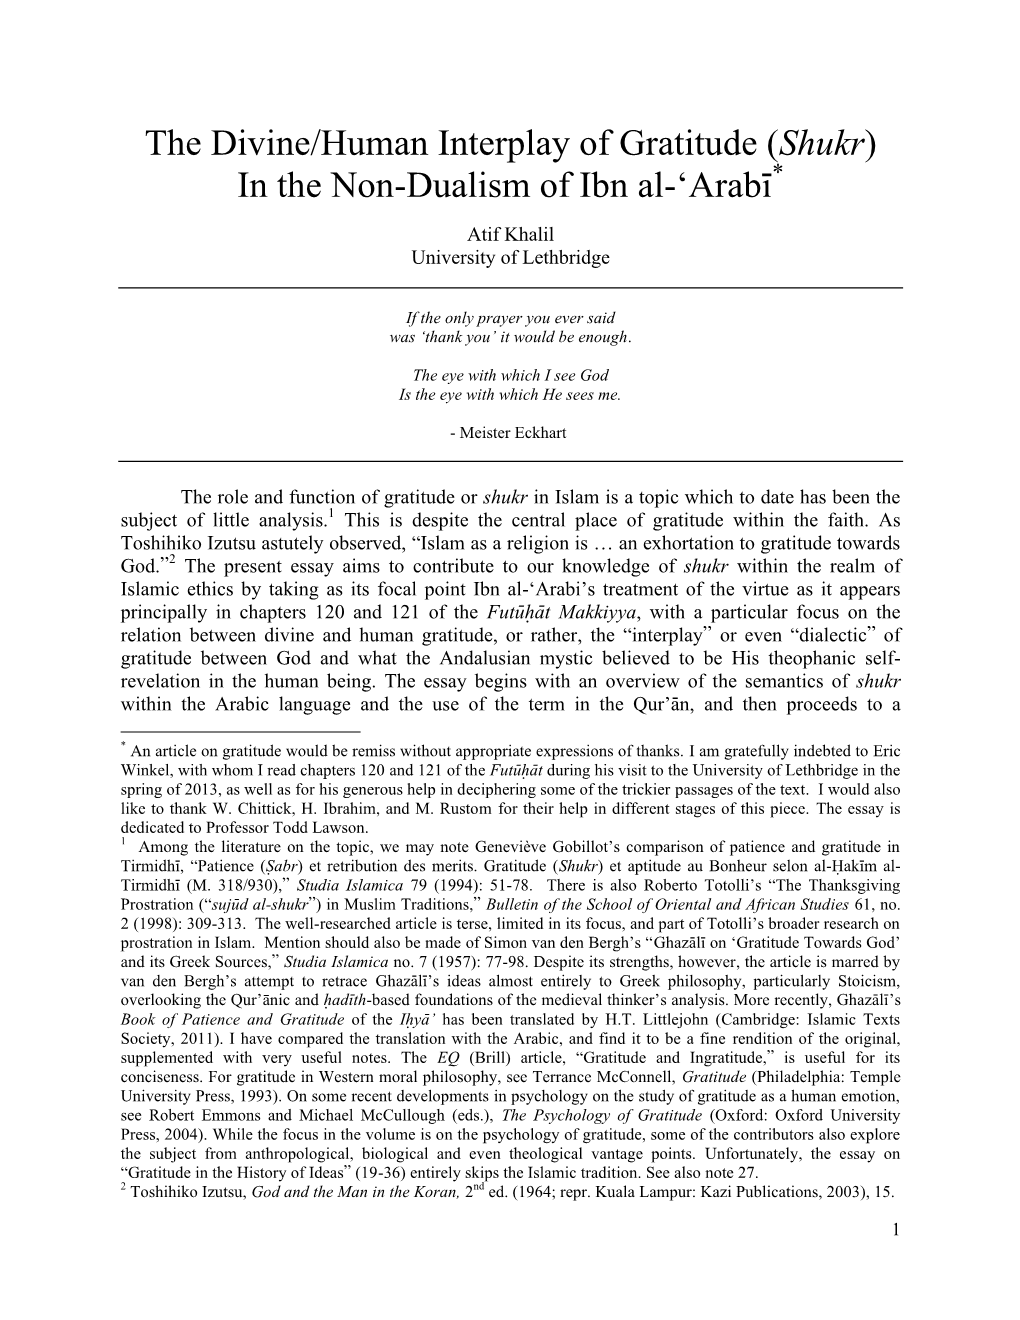 The Divine/Human Interplay of Gratitude (Shukr) in the Non-Dualism of Ibn Al-'Arabп